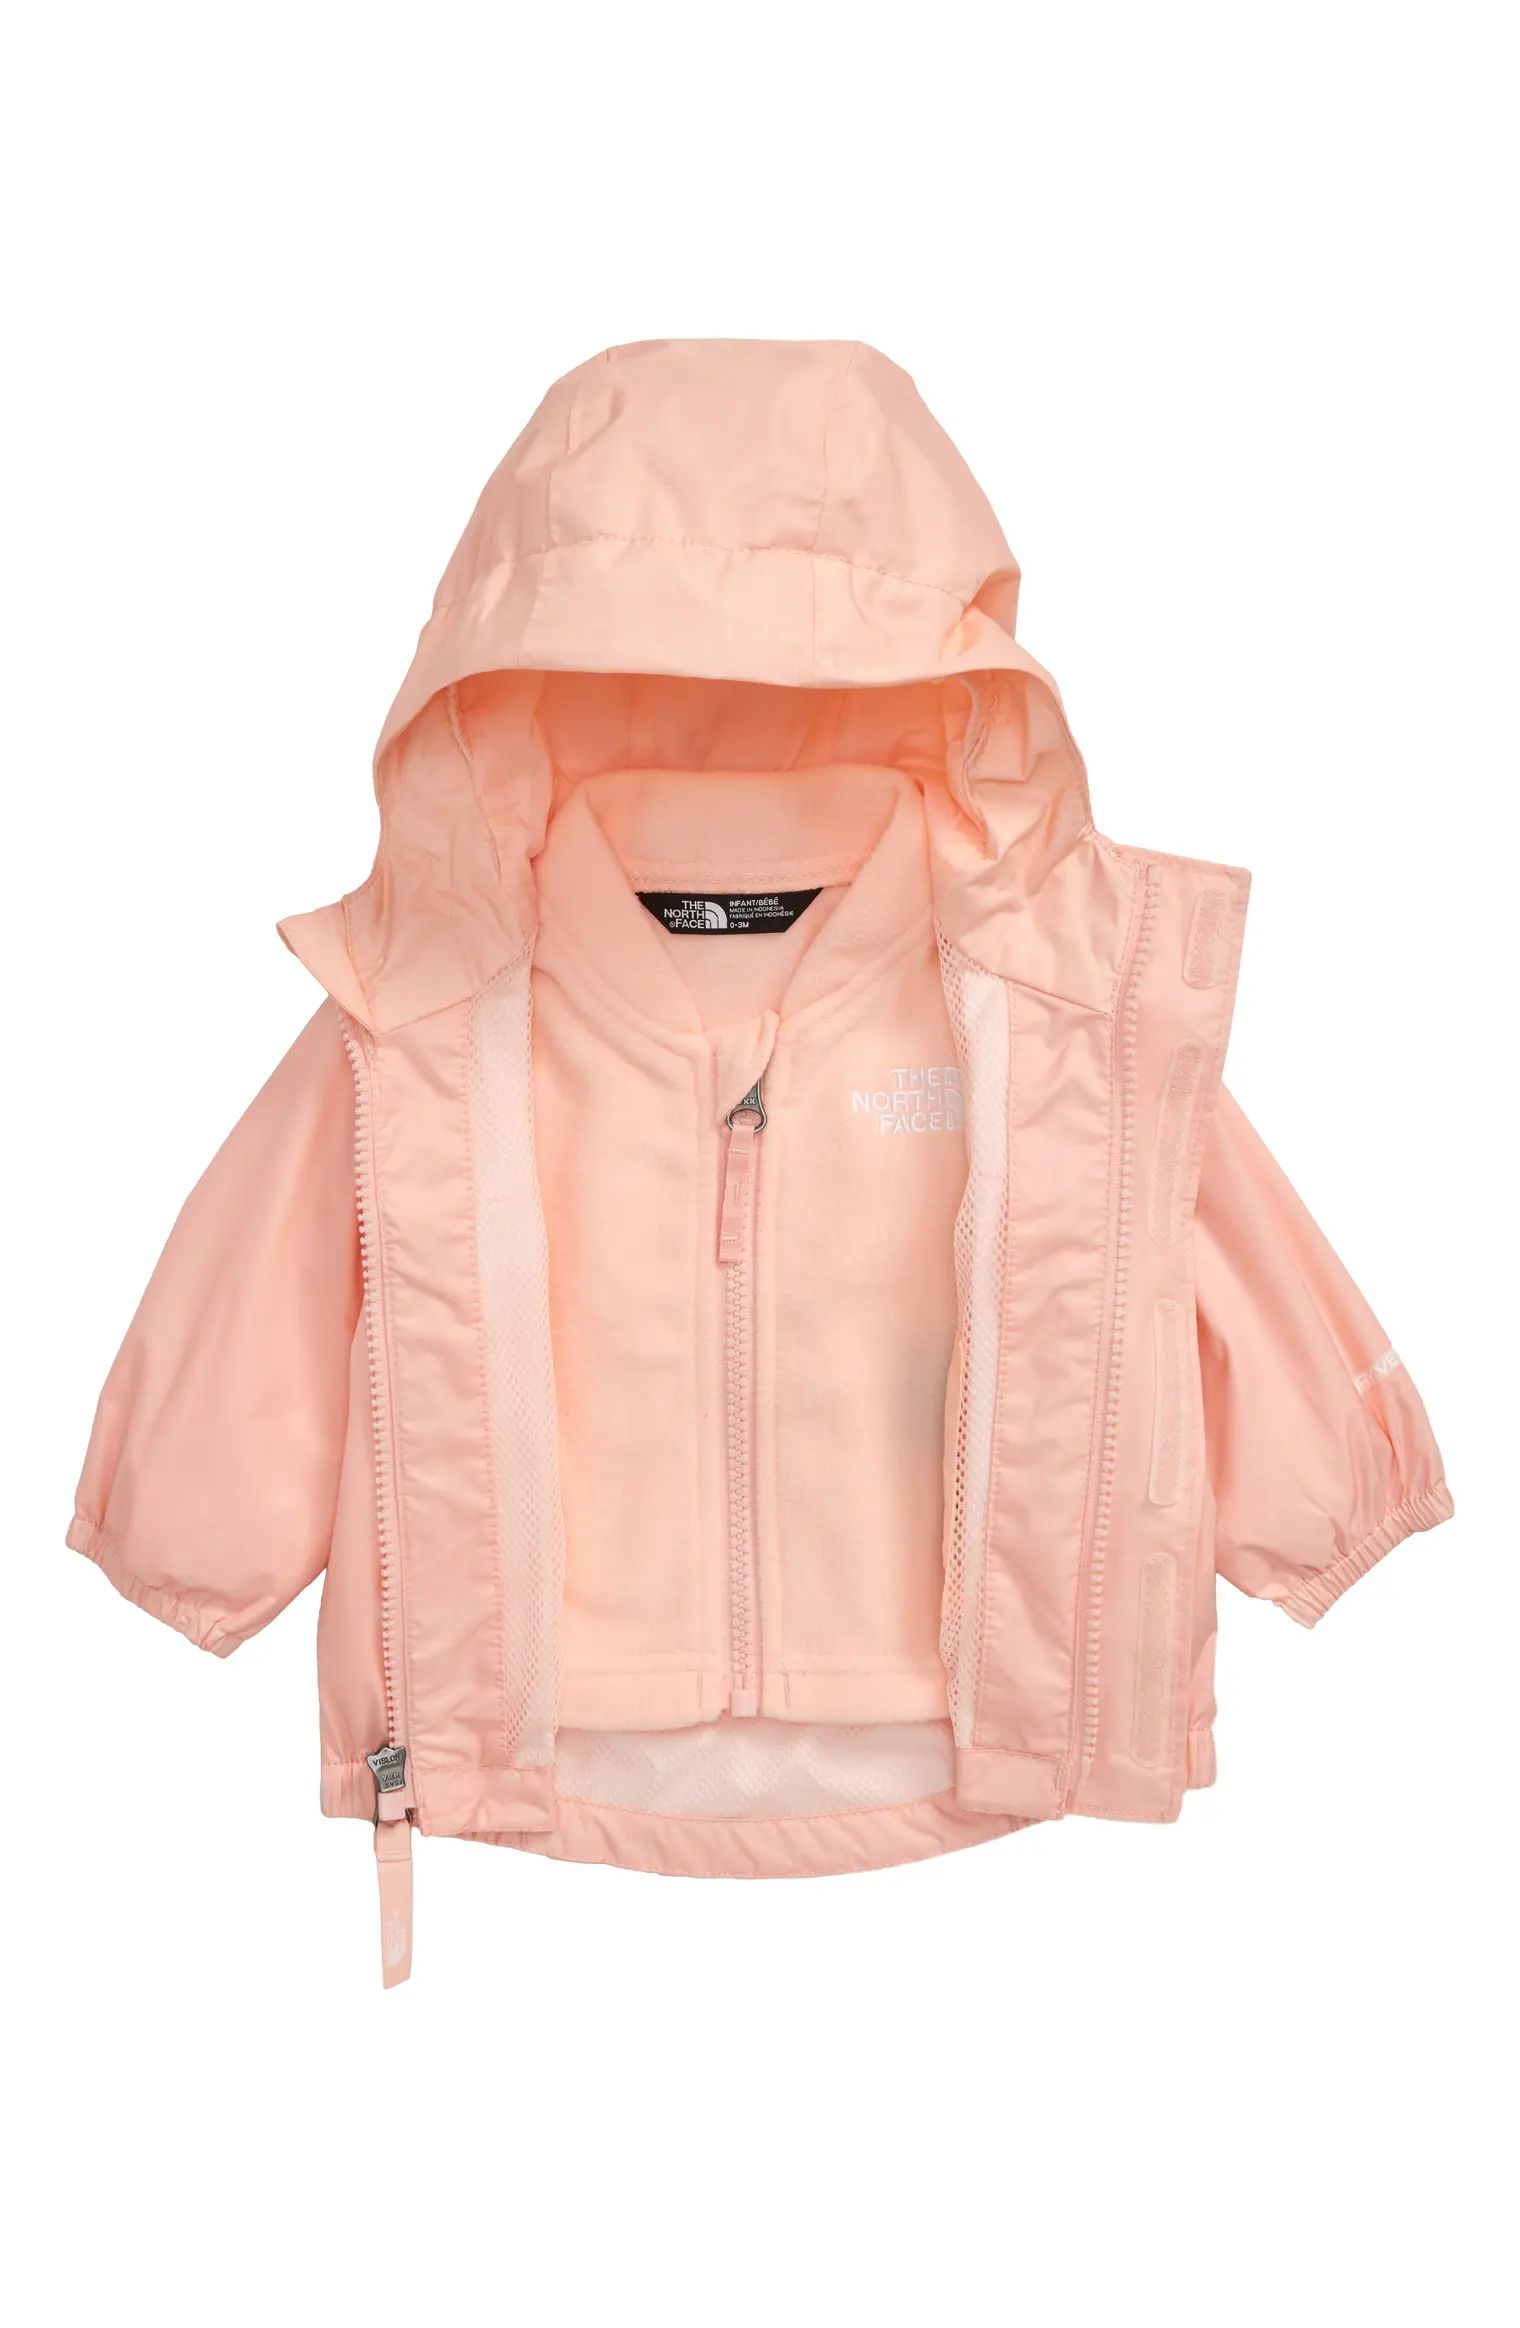 Stormy Rain TriClimate® 3-in-1 Jacket | Nordstrom